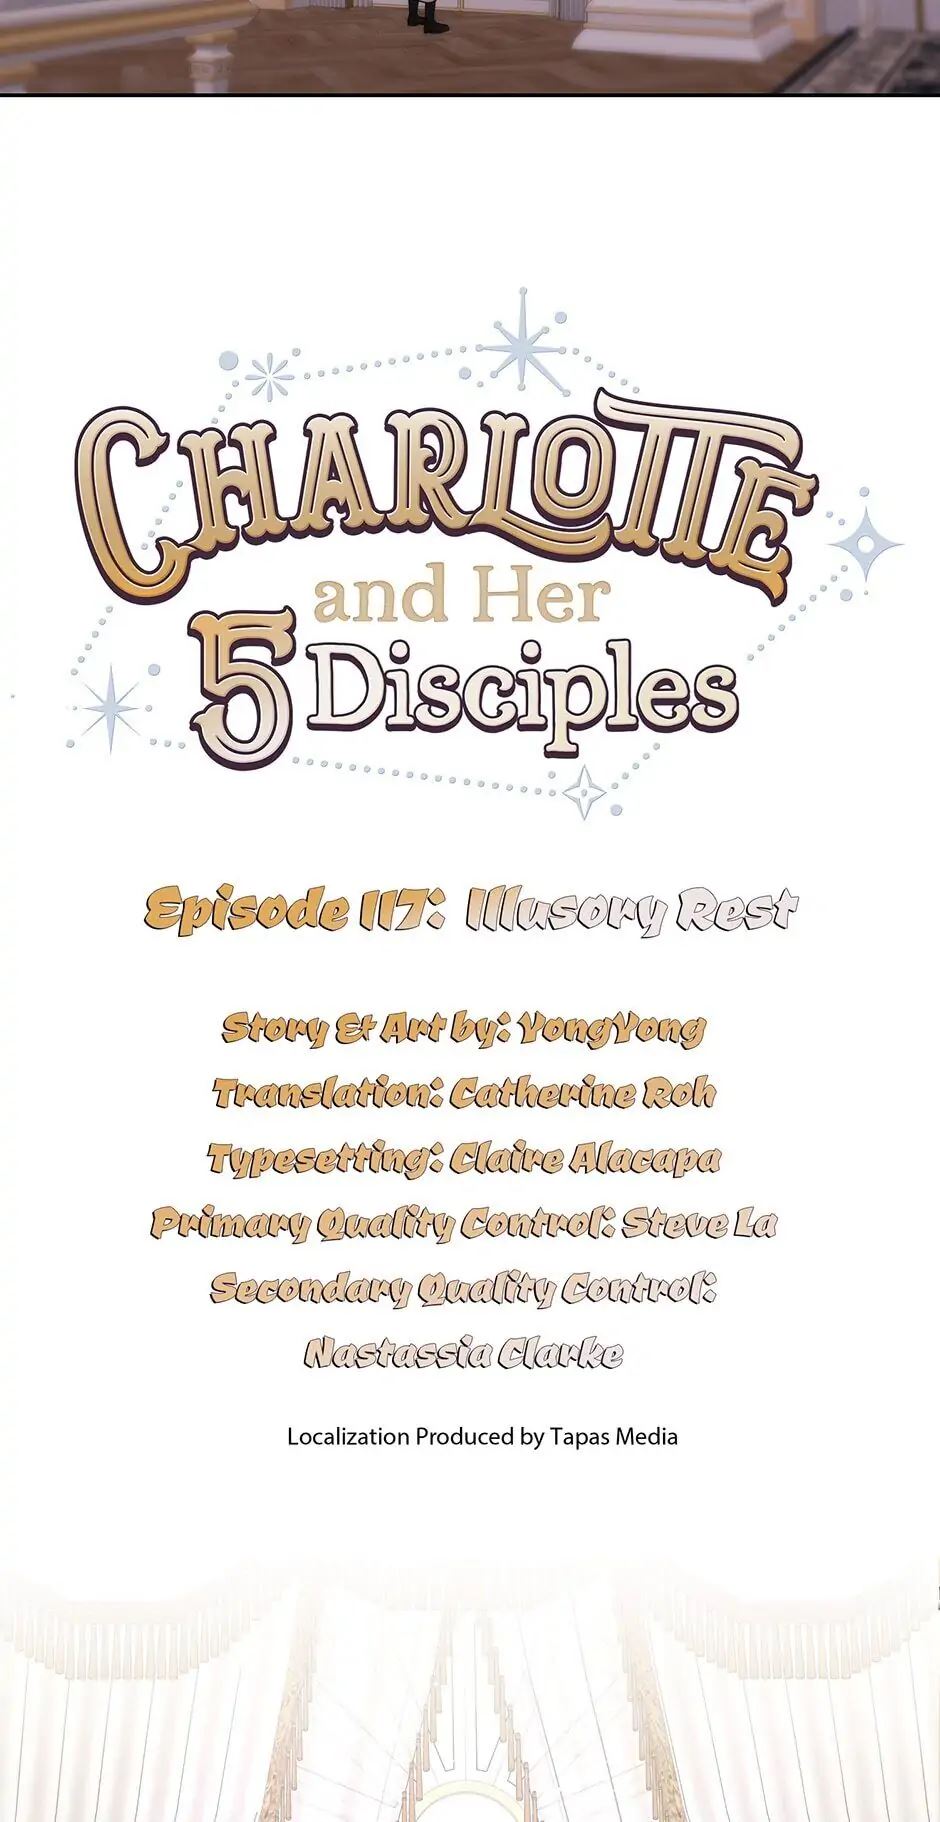 Charlotte and Her 5 Disciples image